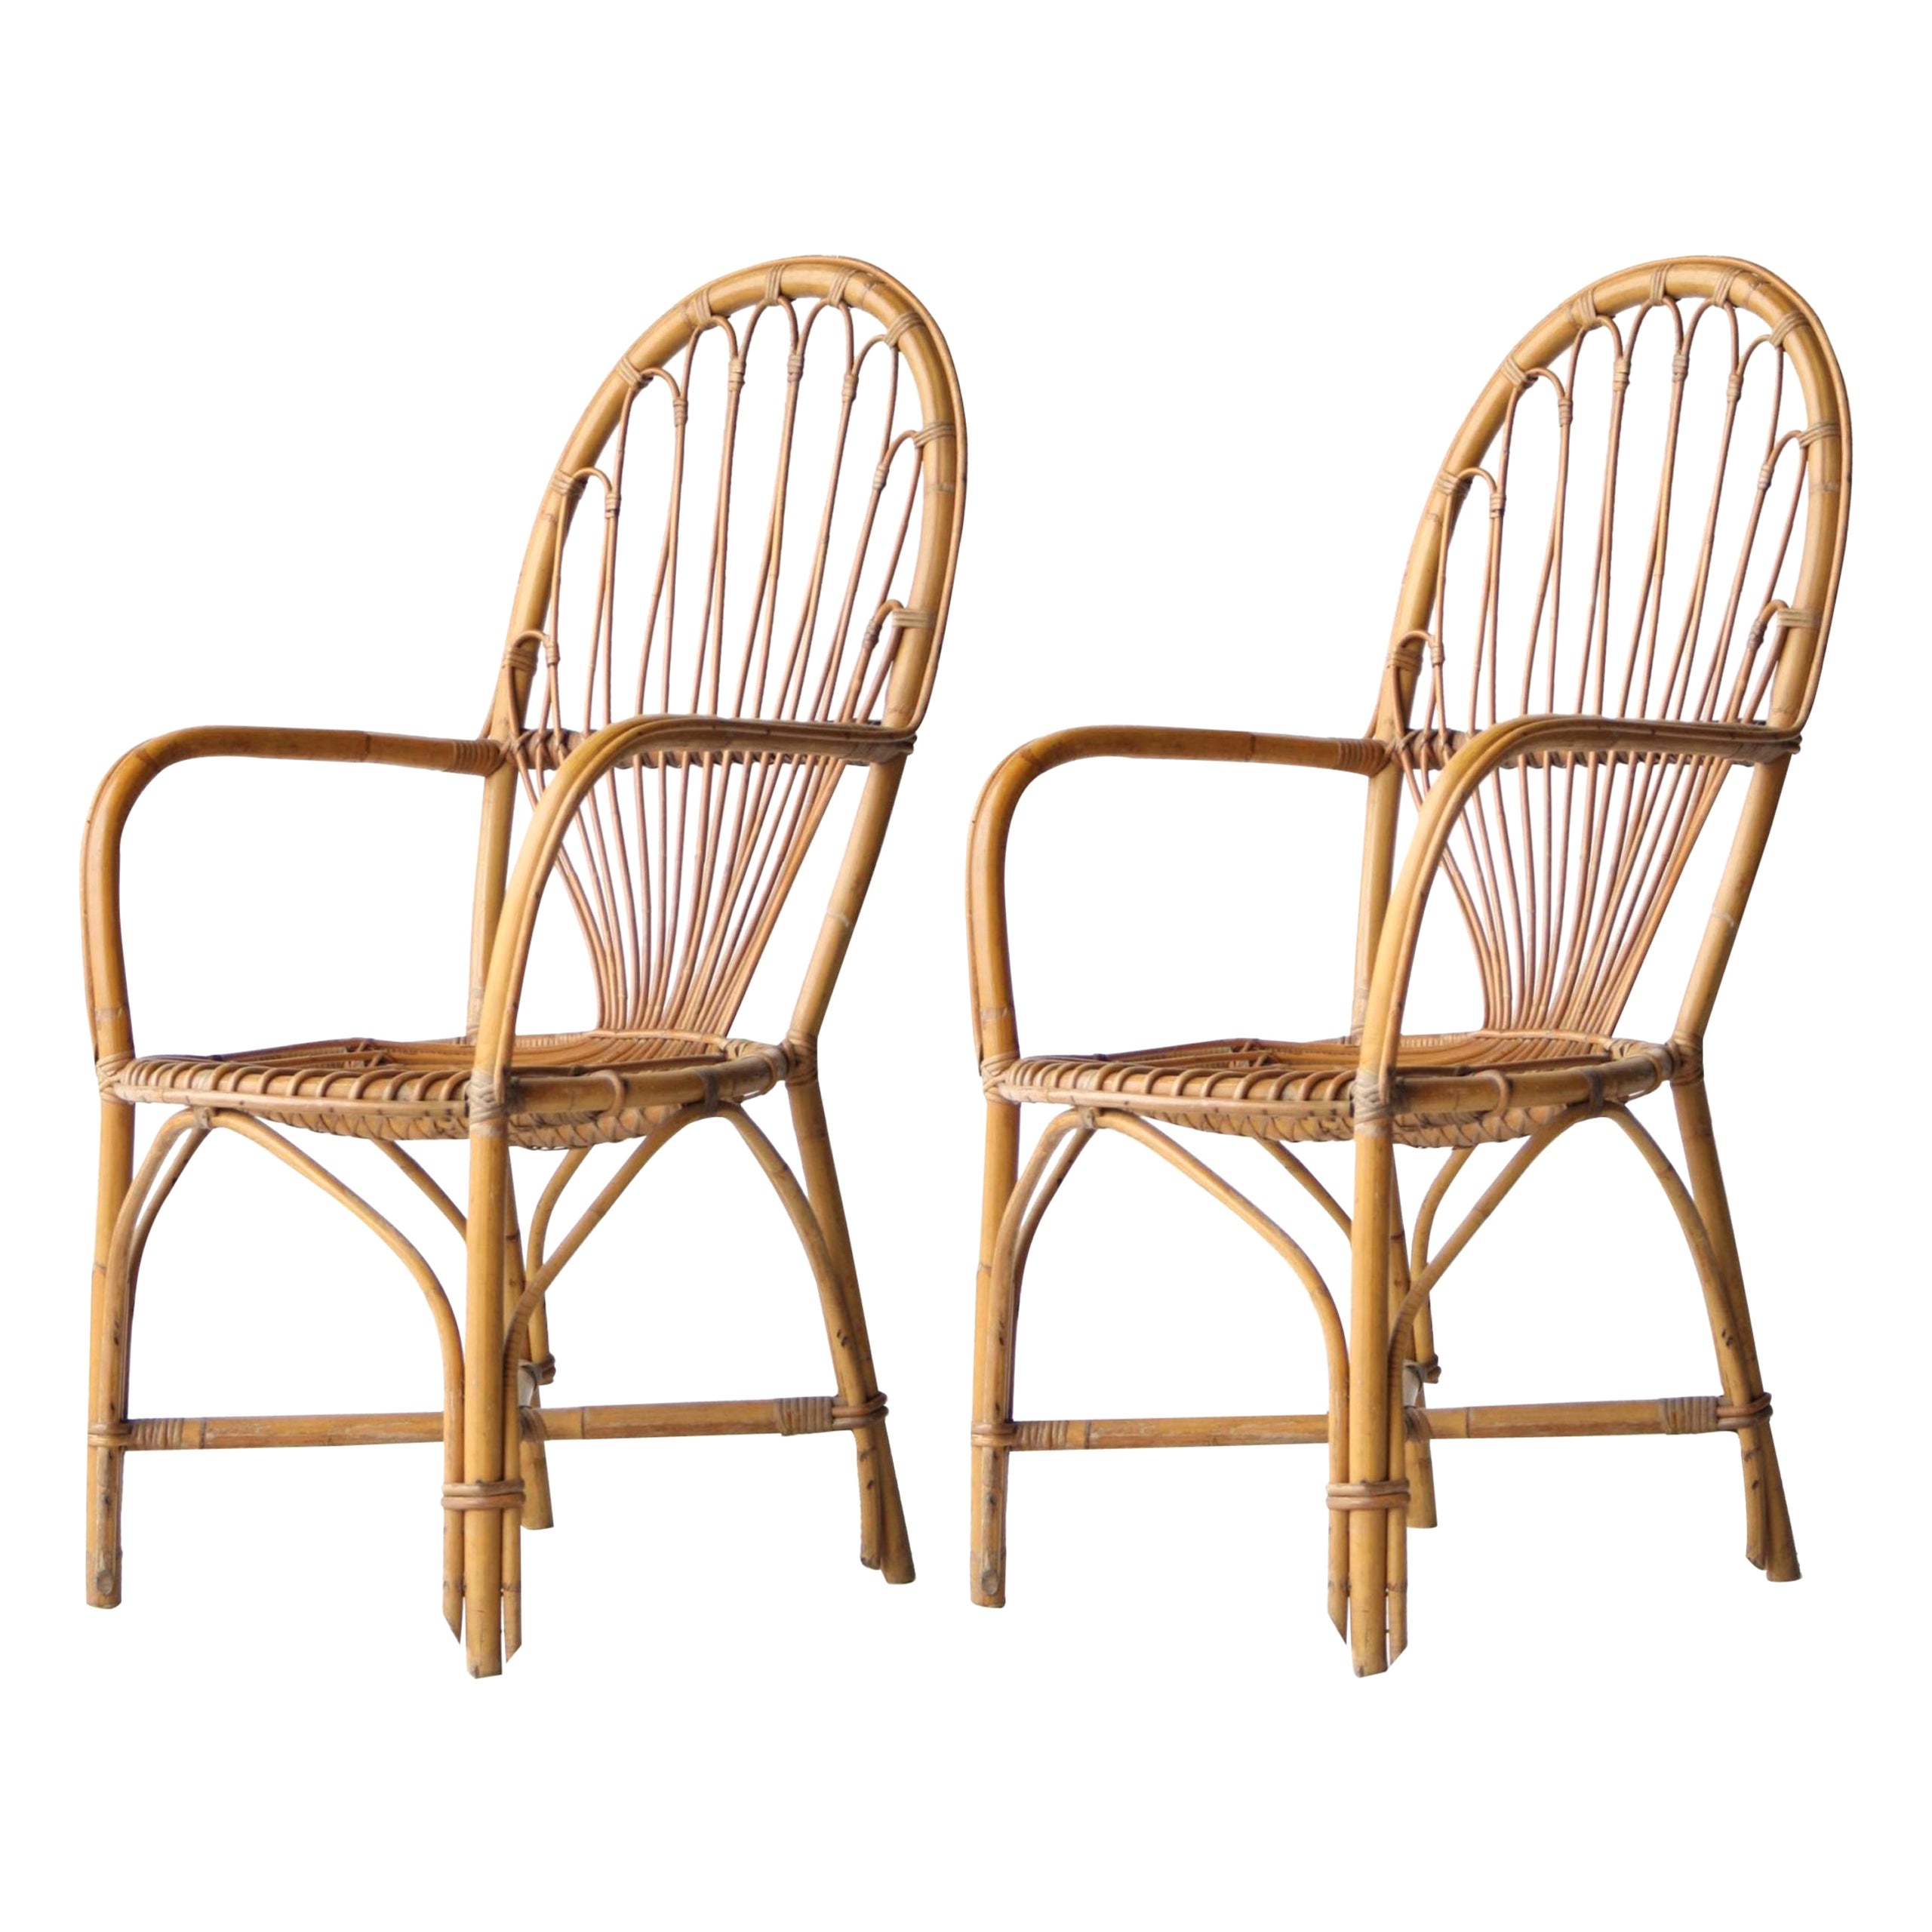 Midcentury Bamboo Wicker Pair of Armchairs, France, 1970